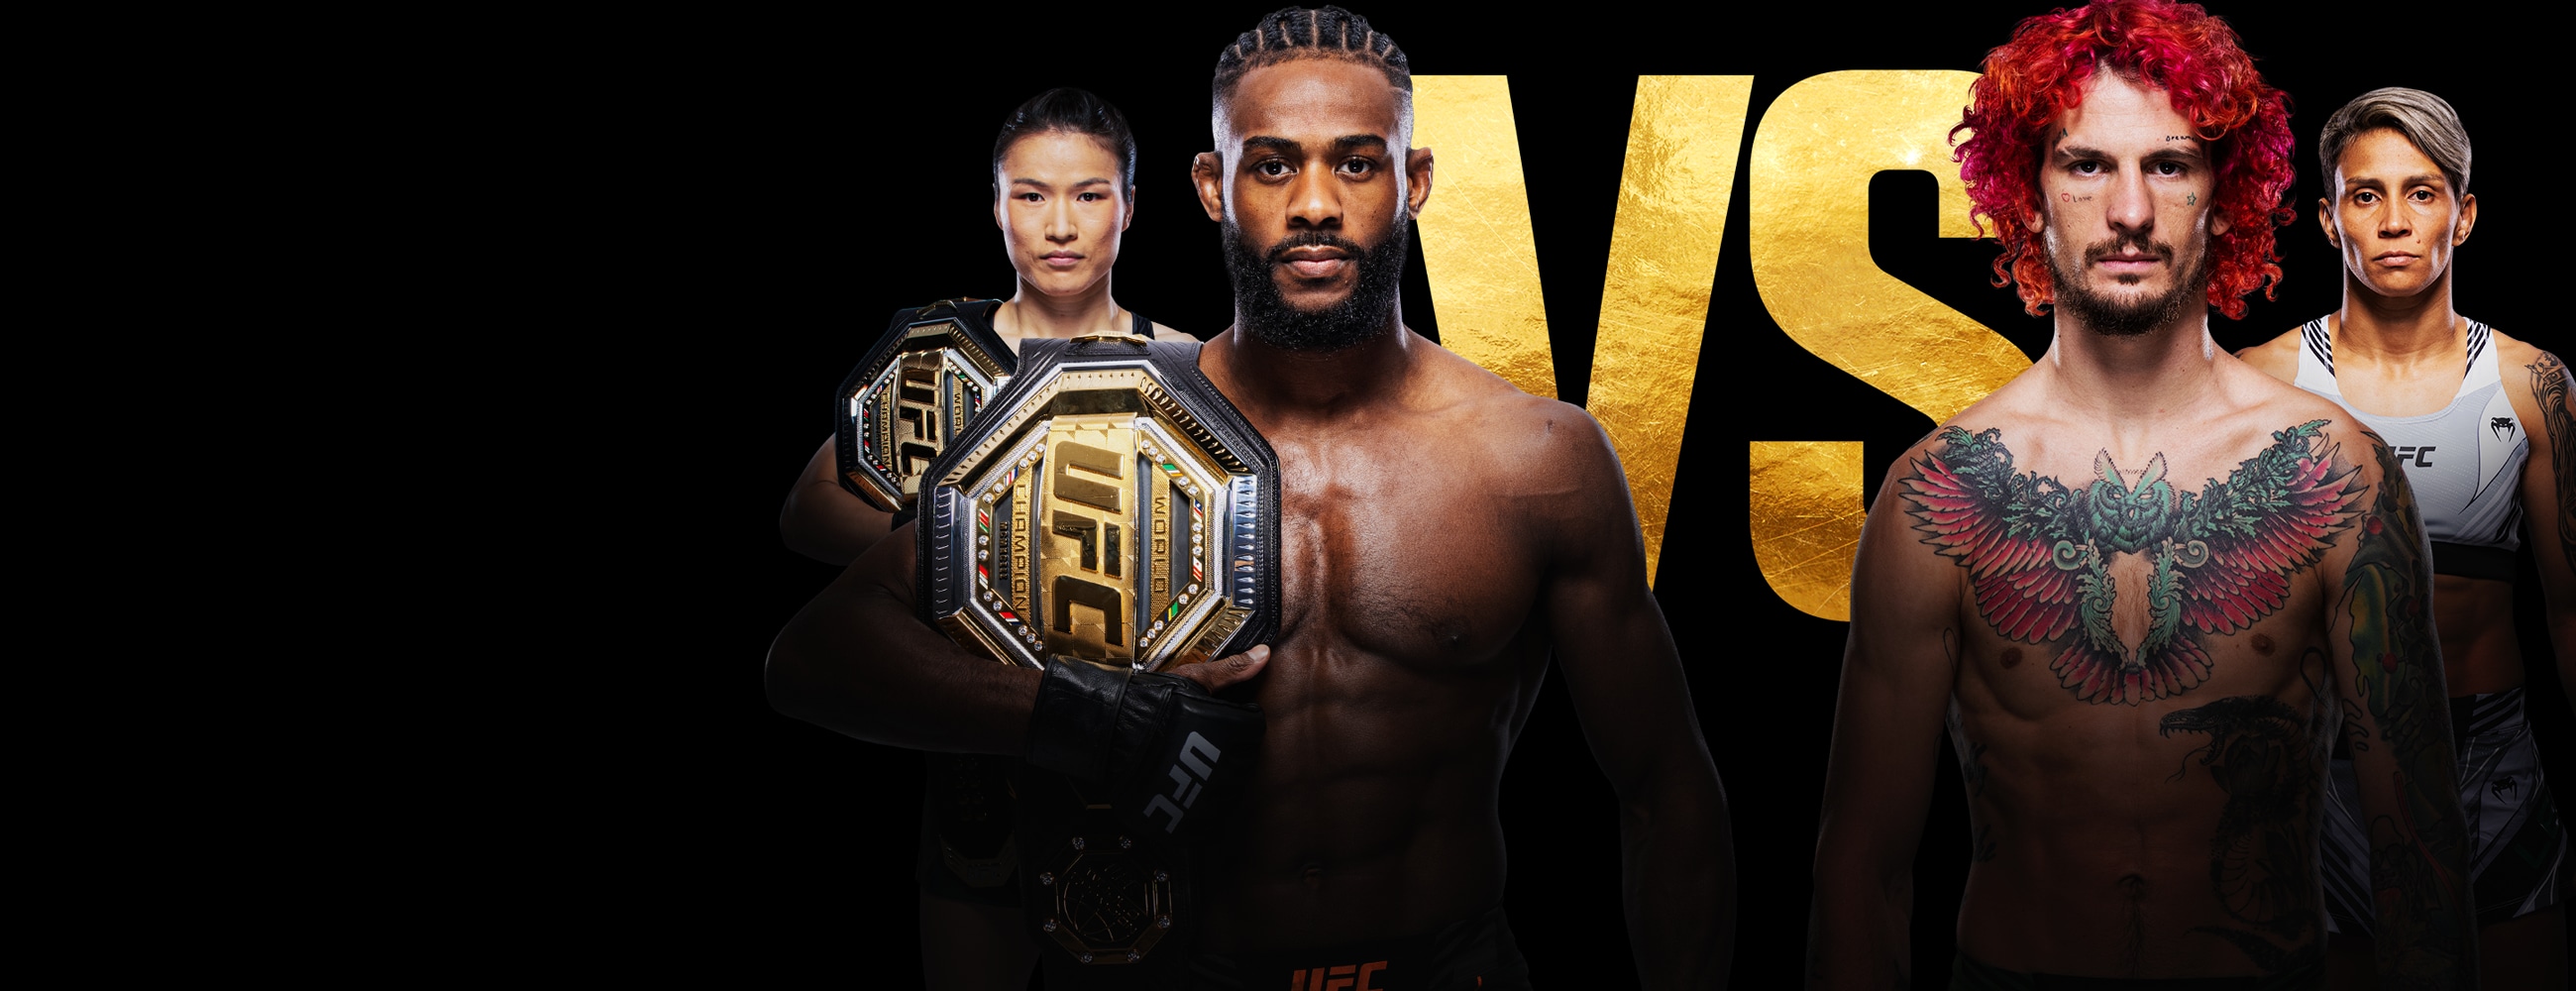 Watch UFC, Boxing, WWE and More on Sky Arena Sky